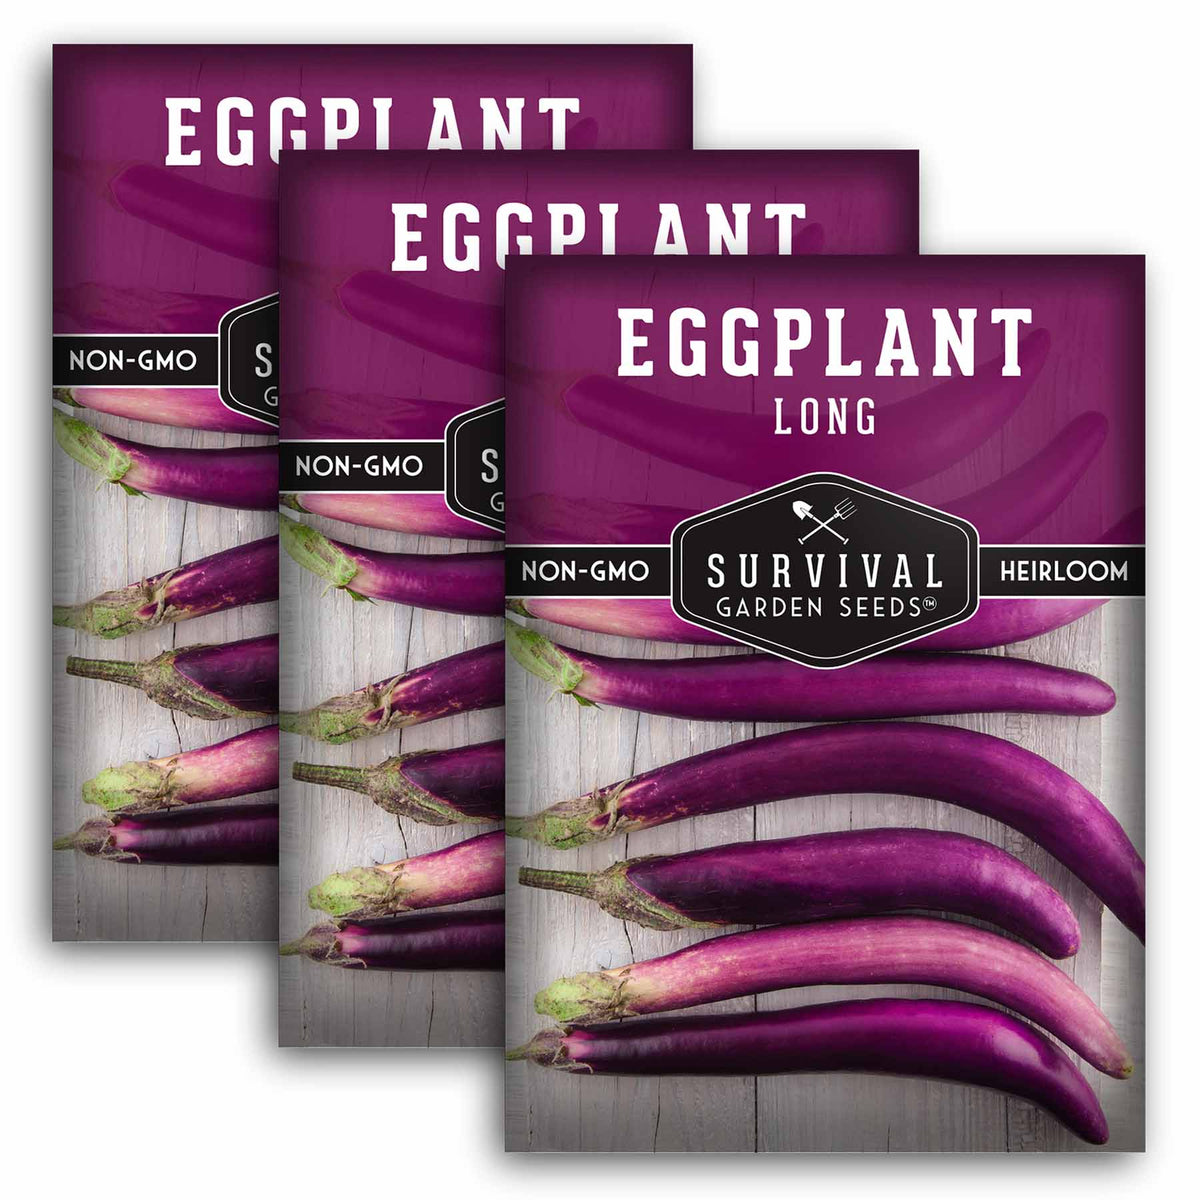 3 packets of Long Eggplant seeds